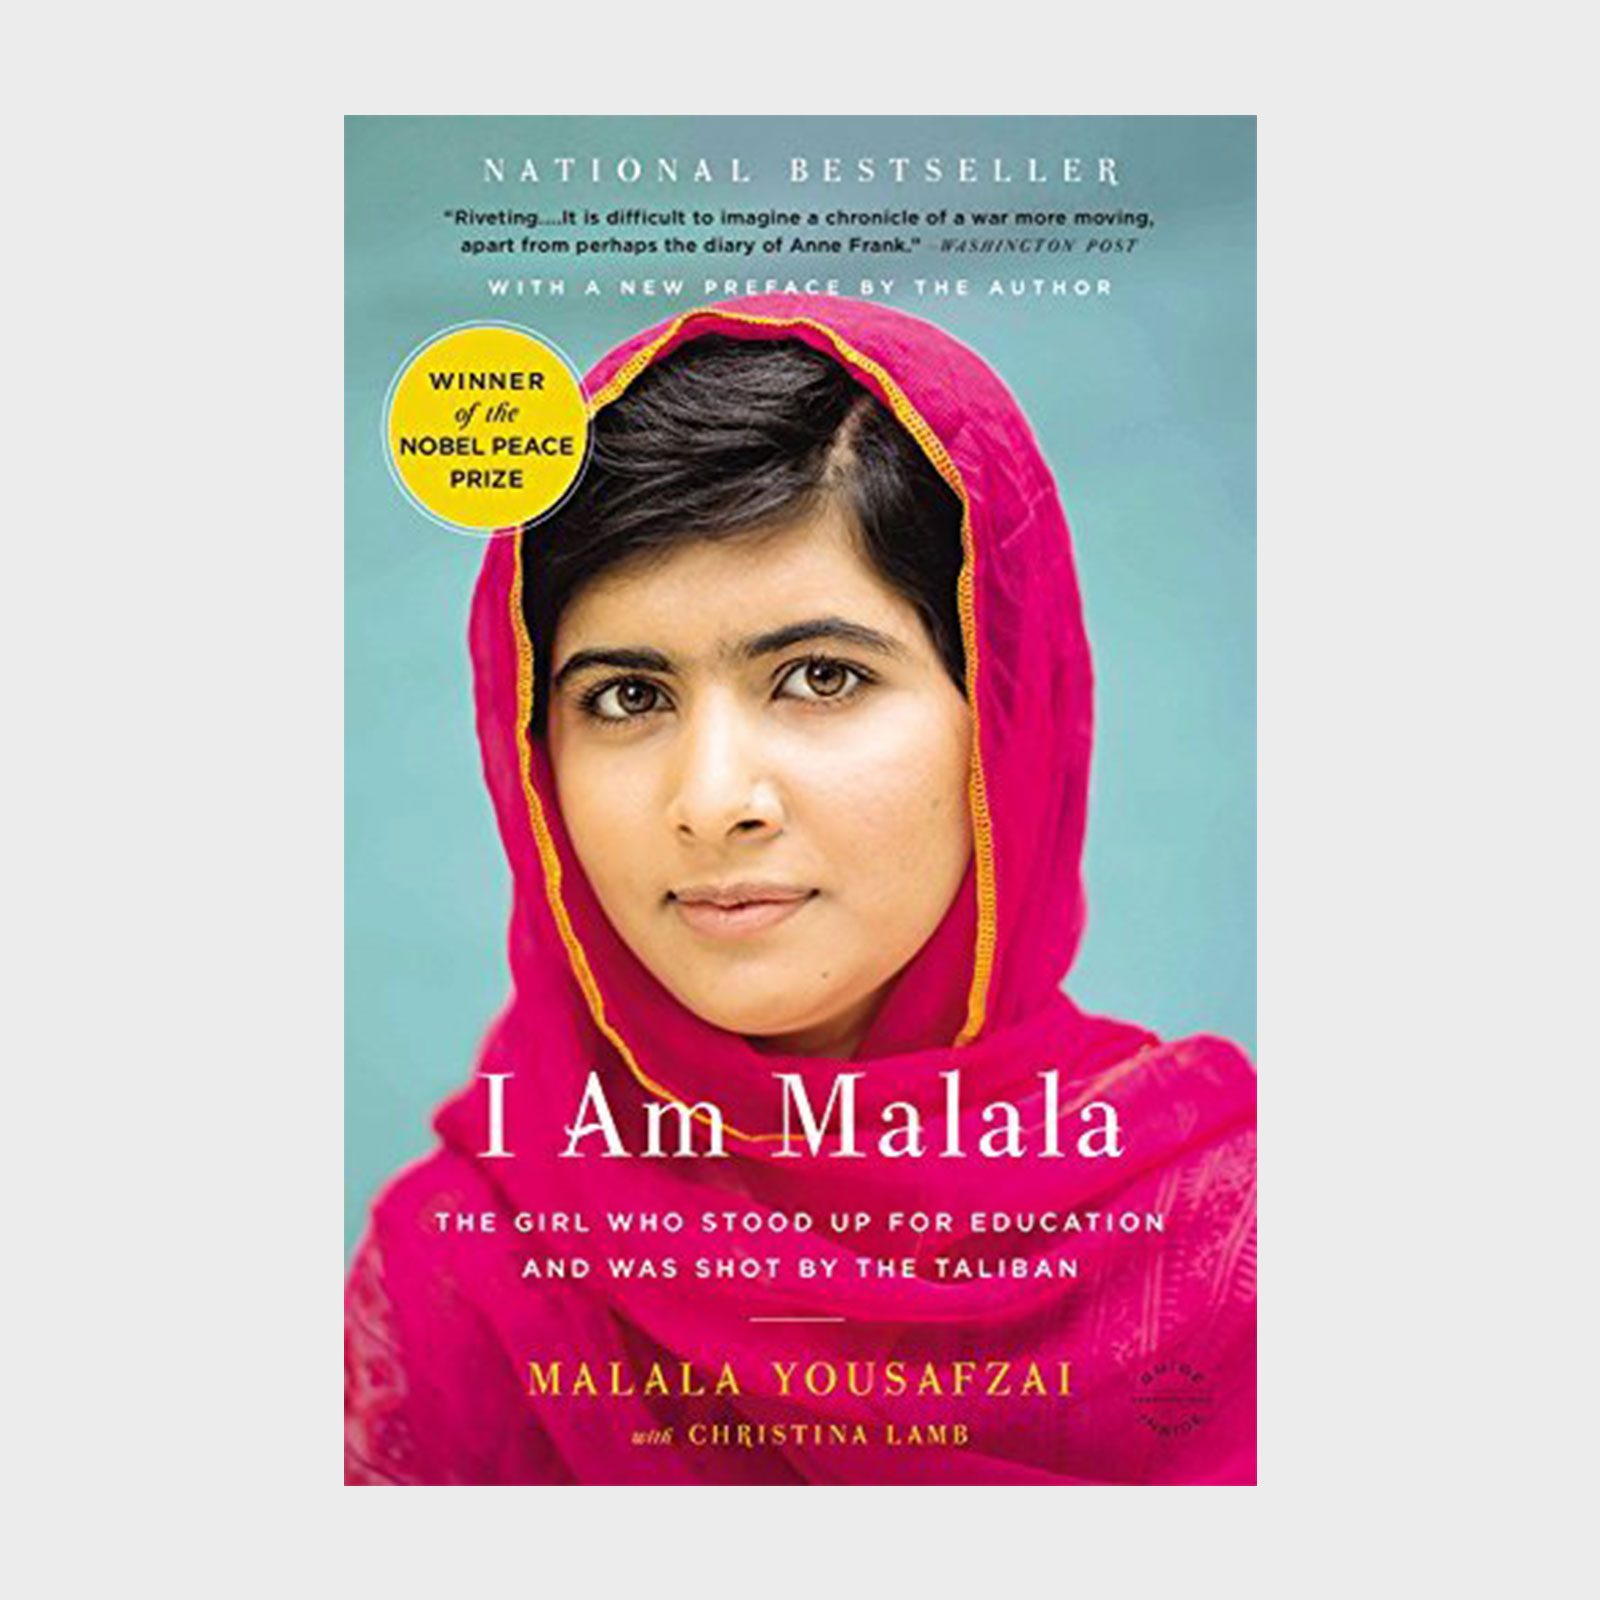 <p>In 2012, few expected 15-year-old Malala Yousafzai to survive after being shot point-blank by the Taliban on her way home from school. She fought for her right to an education and survived. And soon, she became the world's youngest recipient of the Nobel Peace Prize. Her 2015 memoir <a href="https://www.amazon.com/Am-Malala-Stood-Education-Taliban/dp/0316322423" rel="noopener"><em>I Am Malala</em></a> is one of survival, endurance and passion for making waves and creating change.</p> <p class="listicle-page__cta-button-shop"><a class="shop-btn" href="https://www.amazon.com/Am-Malala-Stood-Education-Taliban/dp/0316322423/">Shop Now</a></p>